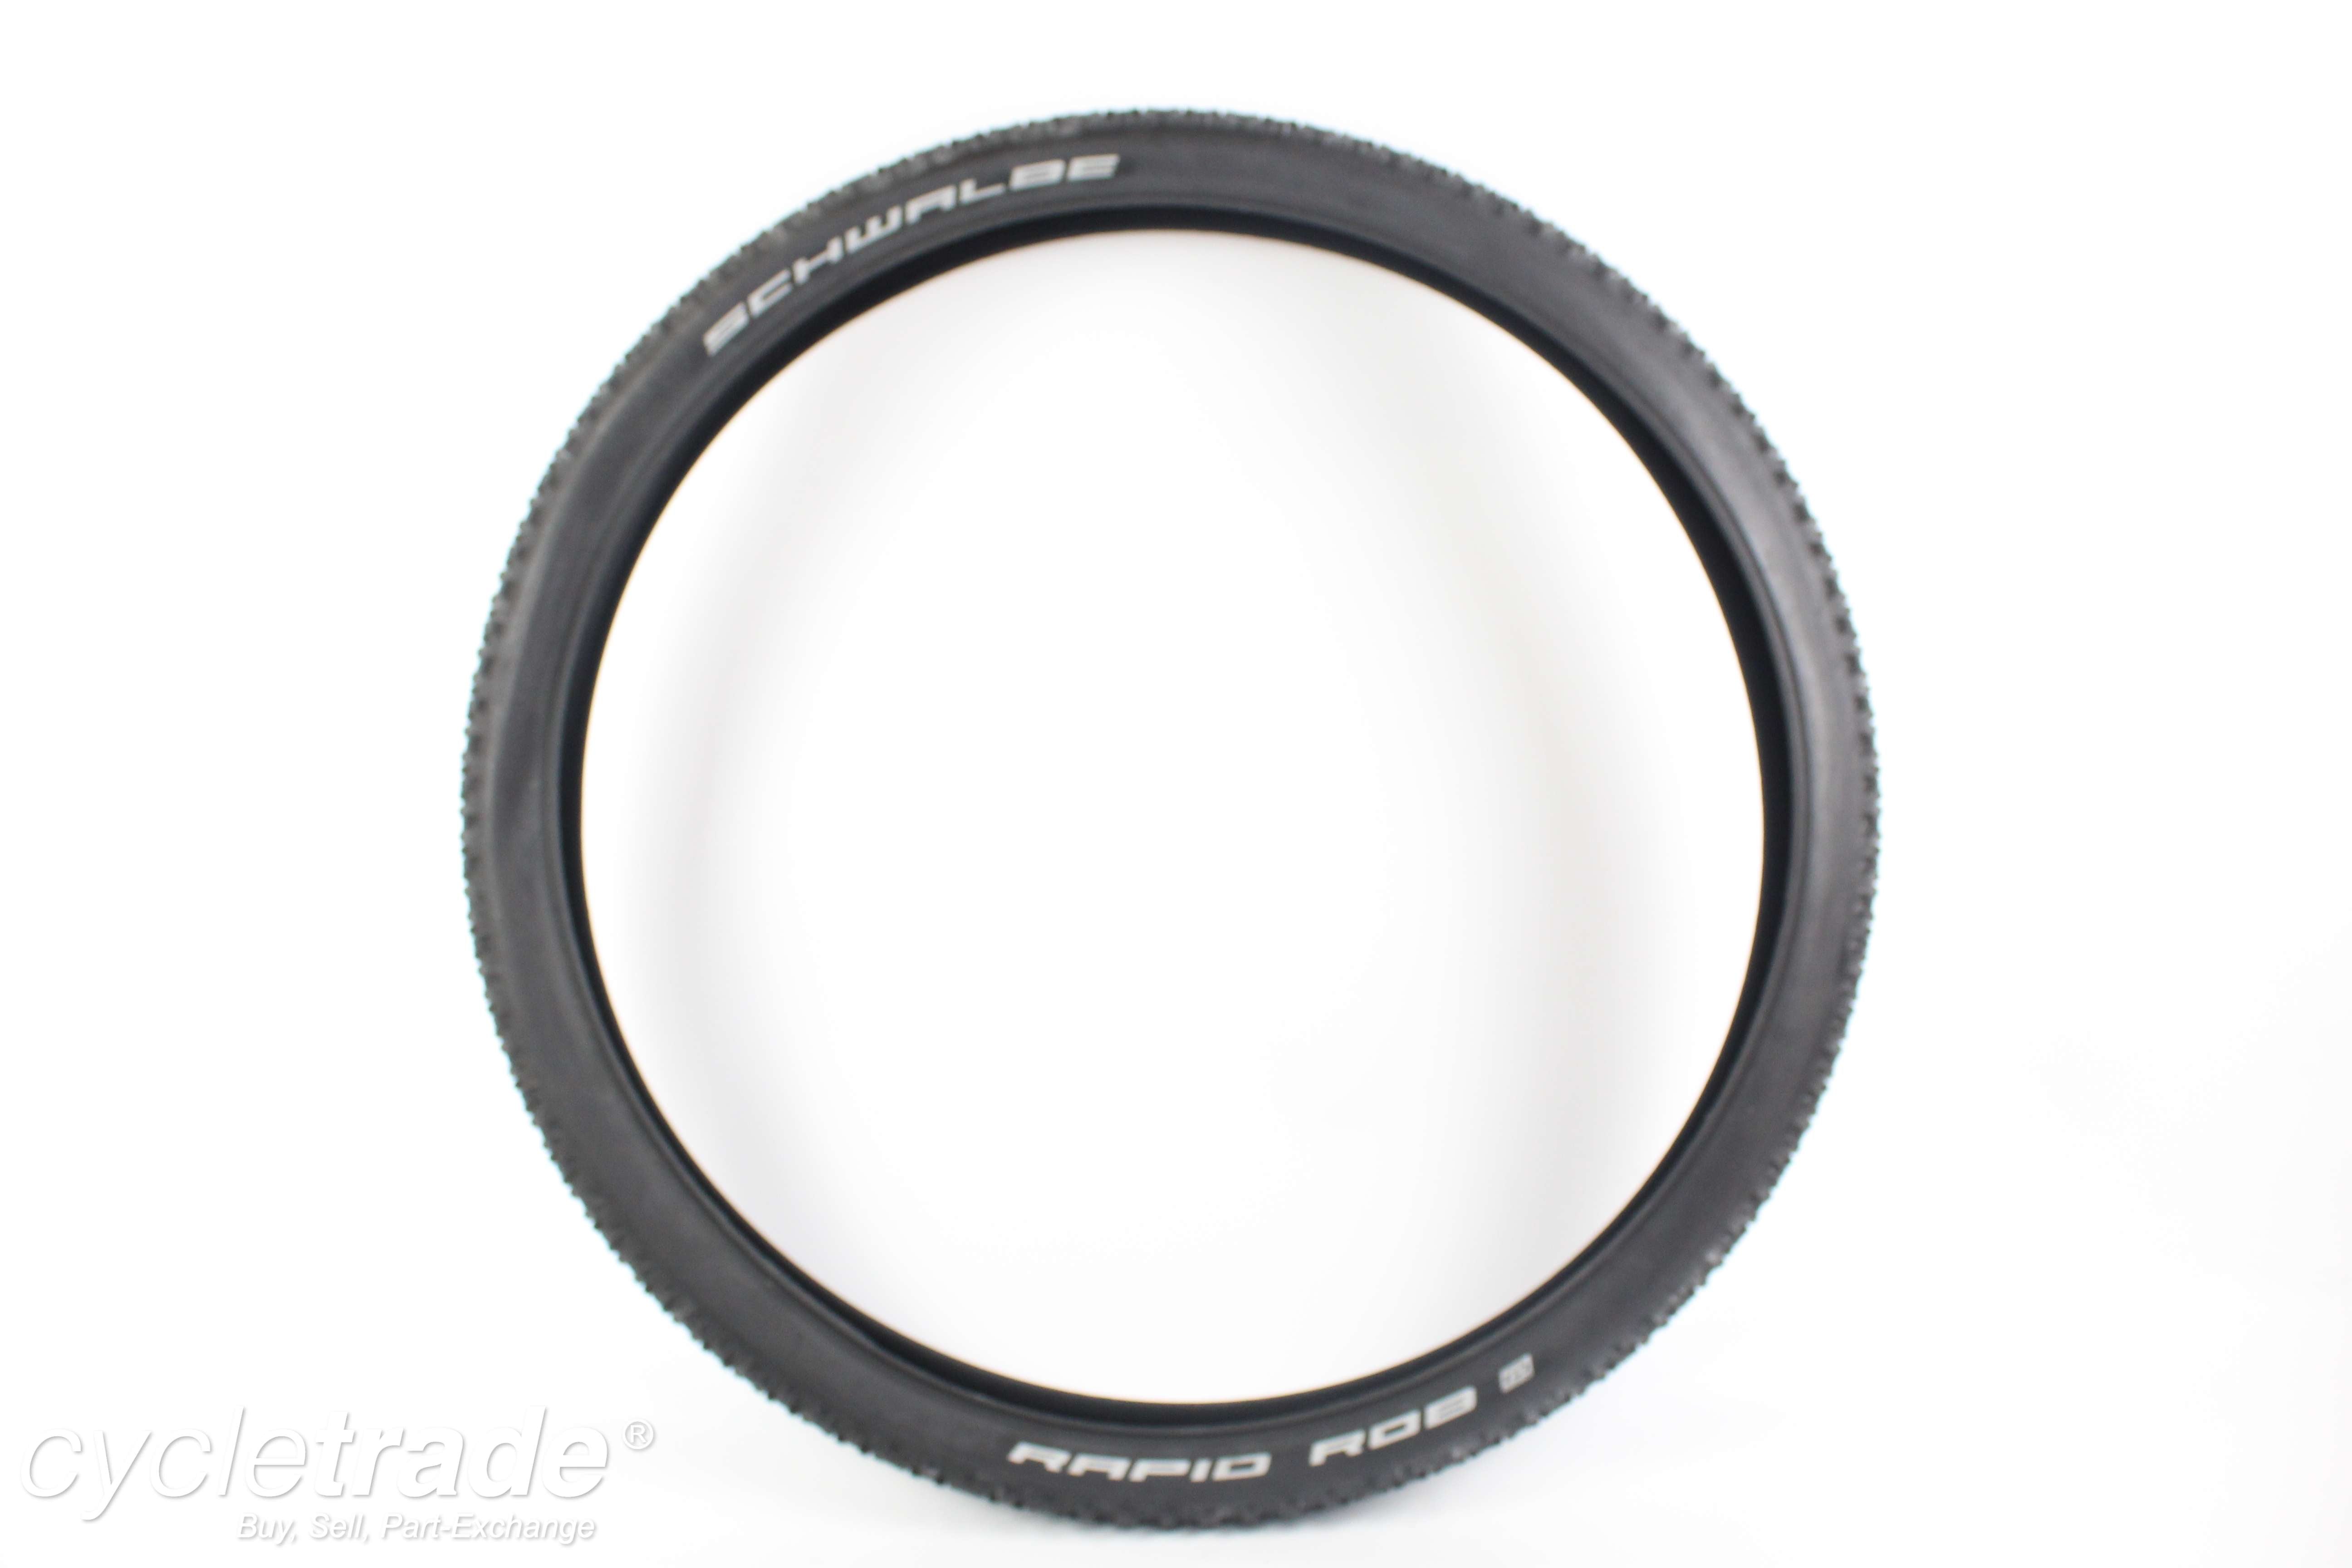 Ex-Demo Single Tyre- Schwalbe Rapid Rob 29 x2.25 Front and Back  - Grade A-